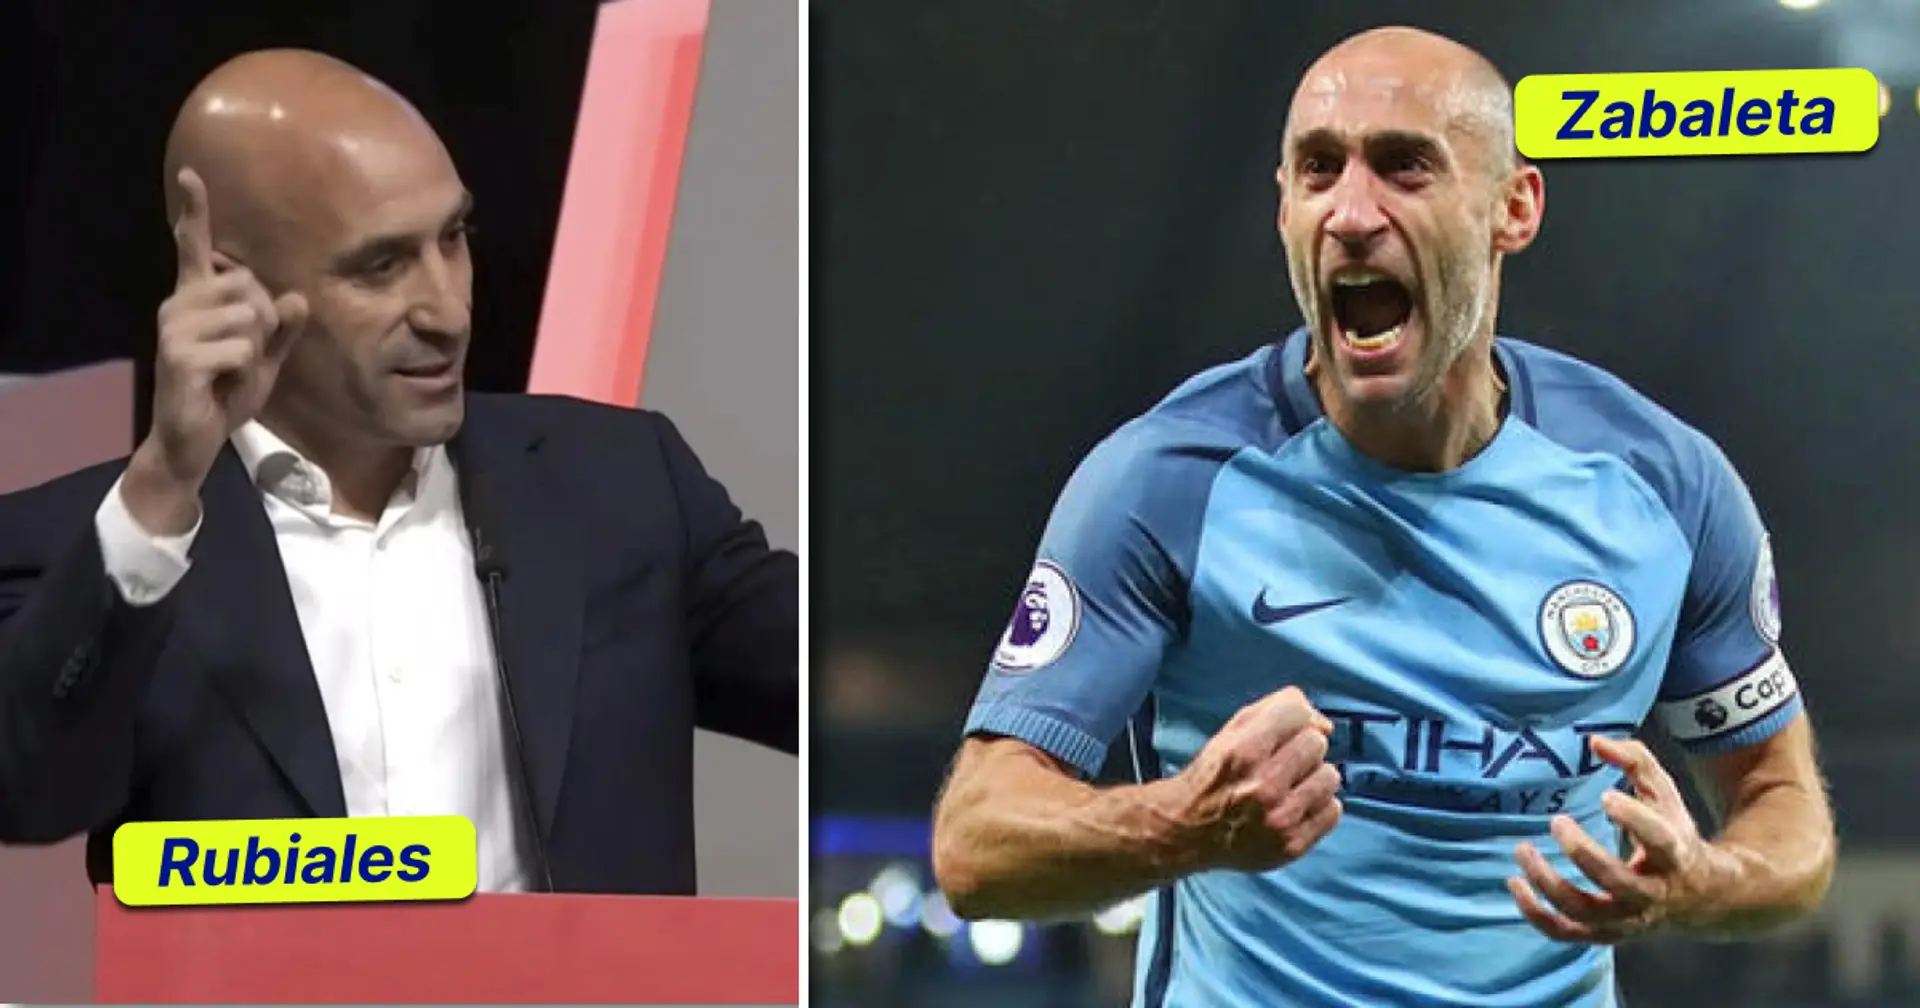 BBC mistakenly use Pablo Zabaleta footage in story about Luis Rubiales